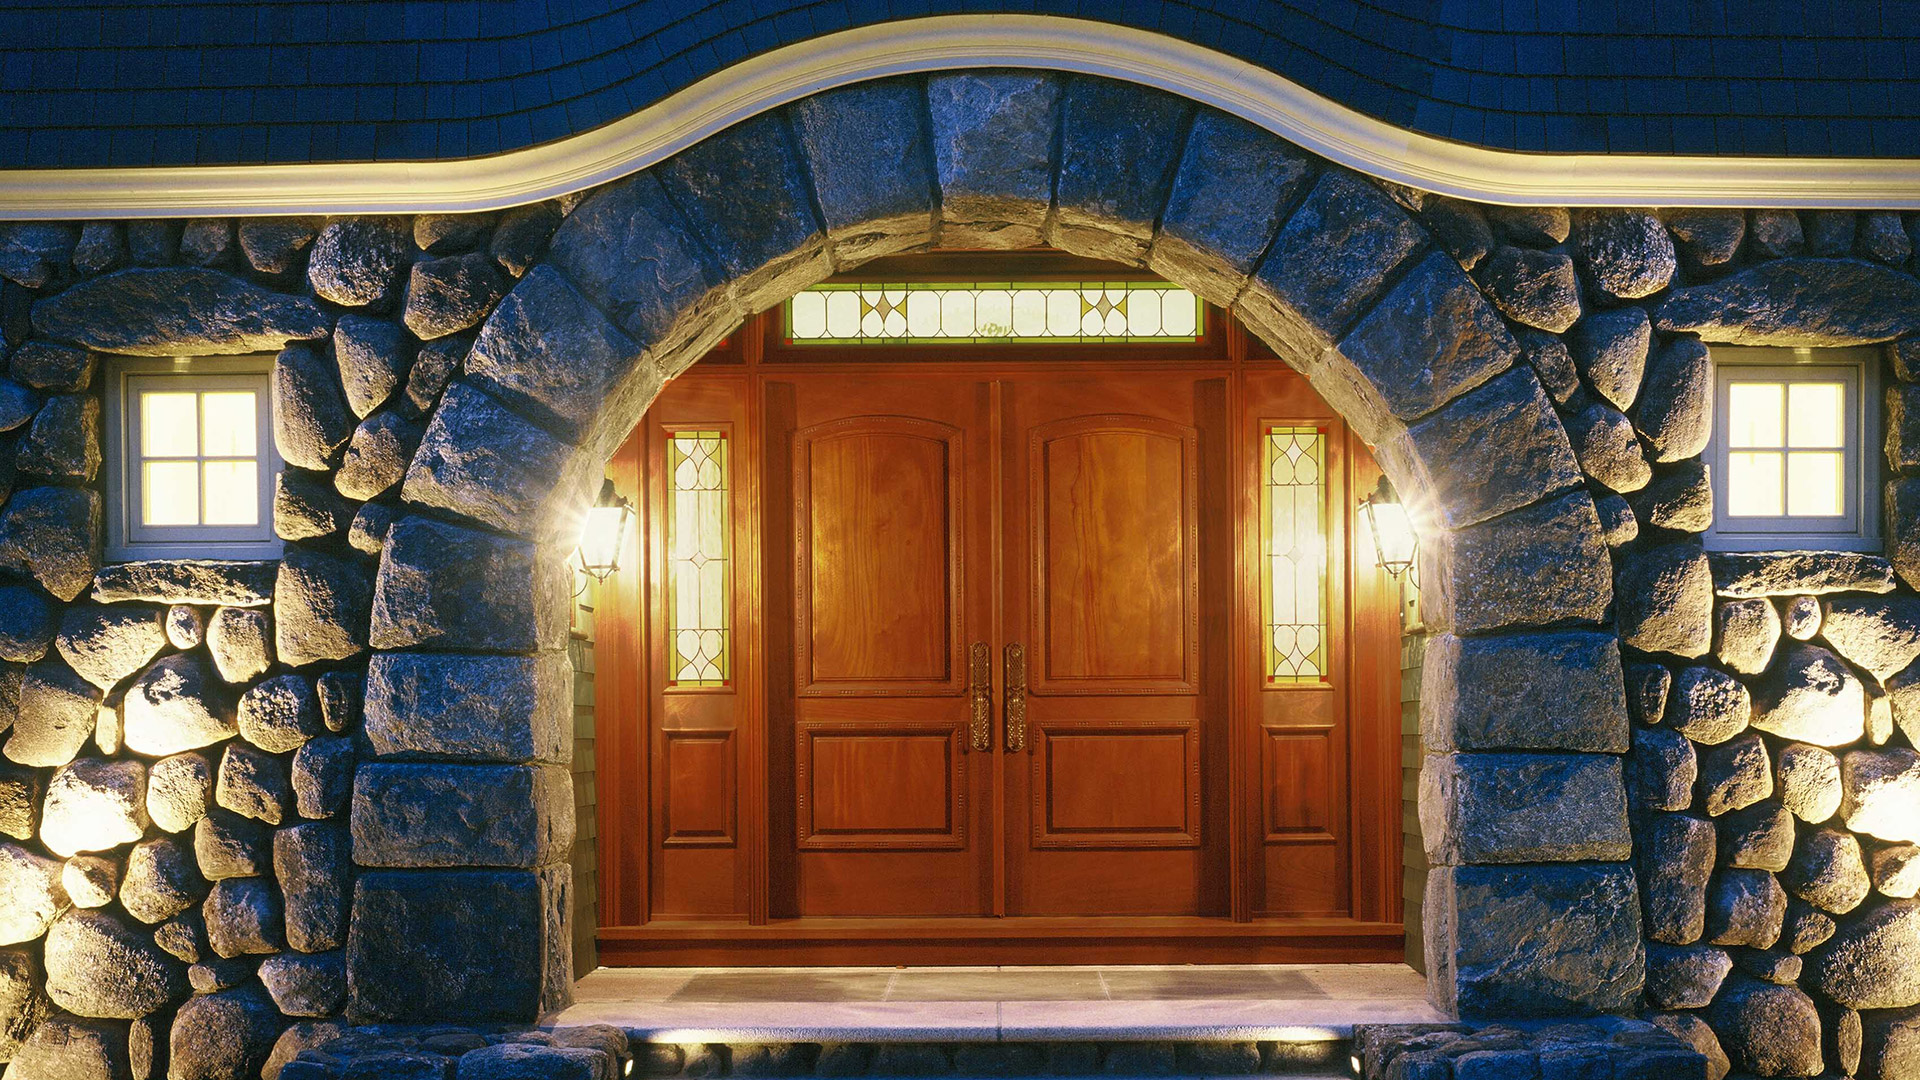 Concord Massachusetts stone arch entry with custom mahogany doors and stained glass sidelights